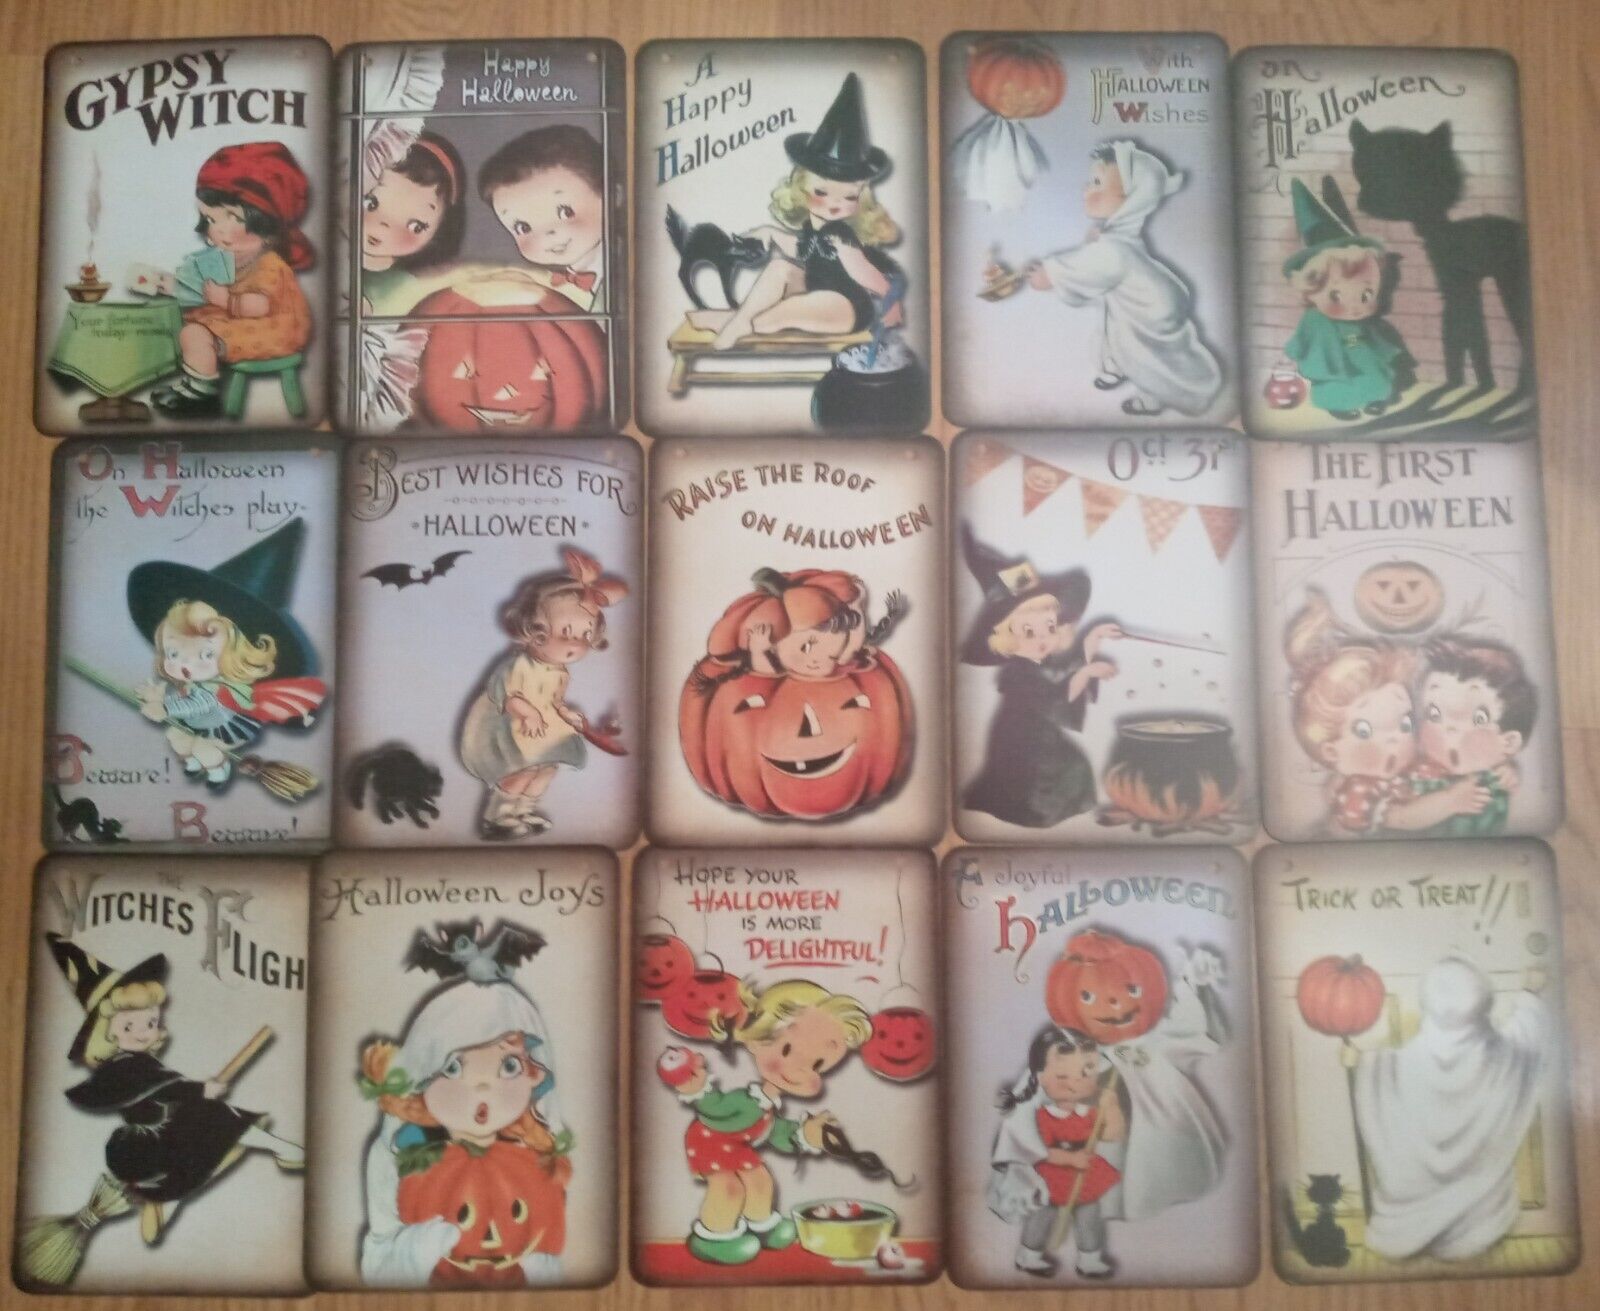 HALLOWEEN VINTAGE STYLE CARDSTOCK BANNER - COMES WITH STRING TO MAKE BANNER